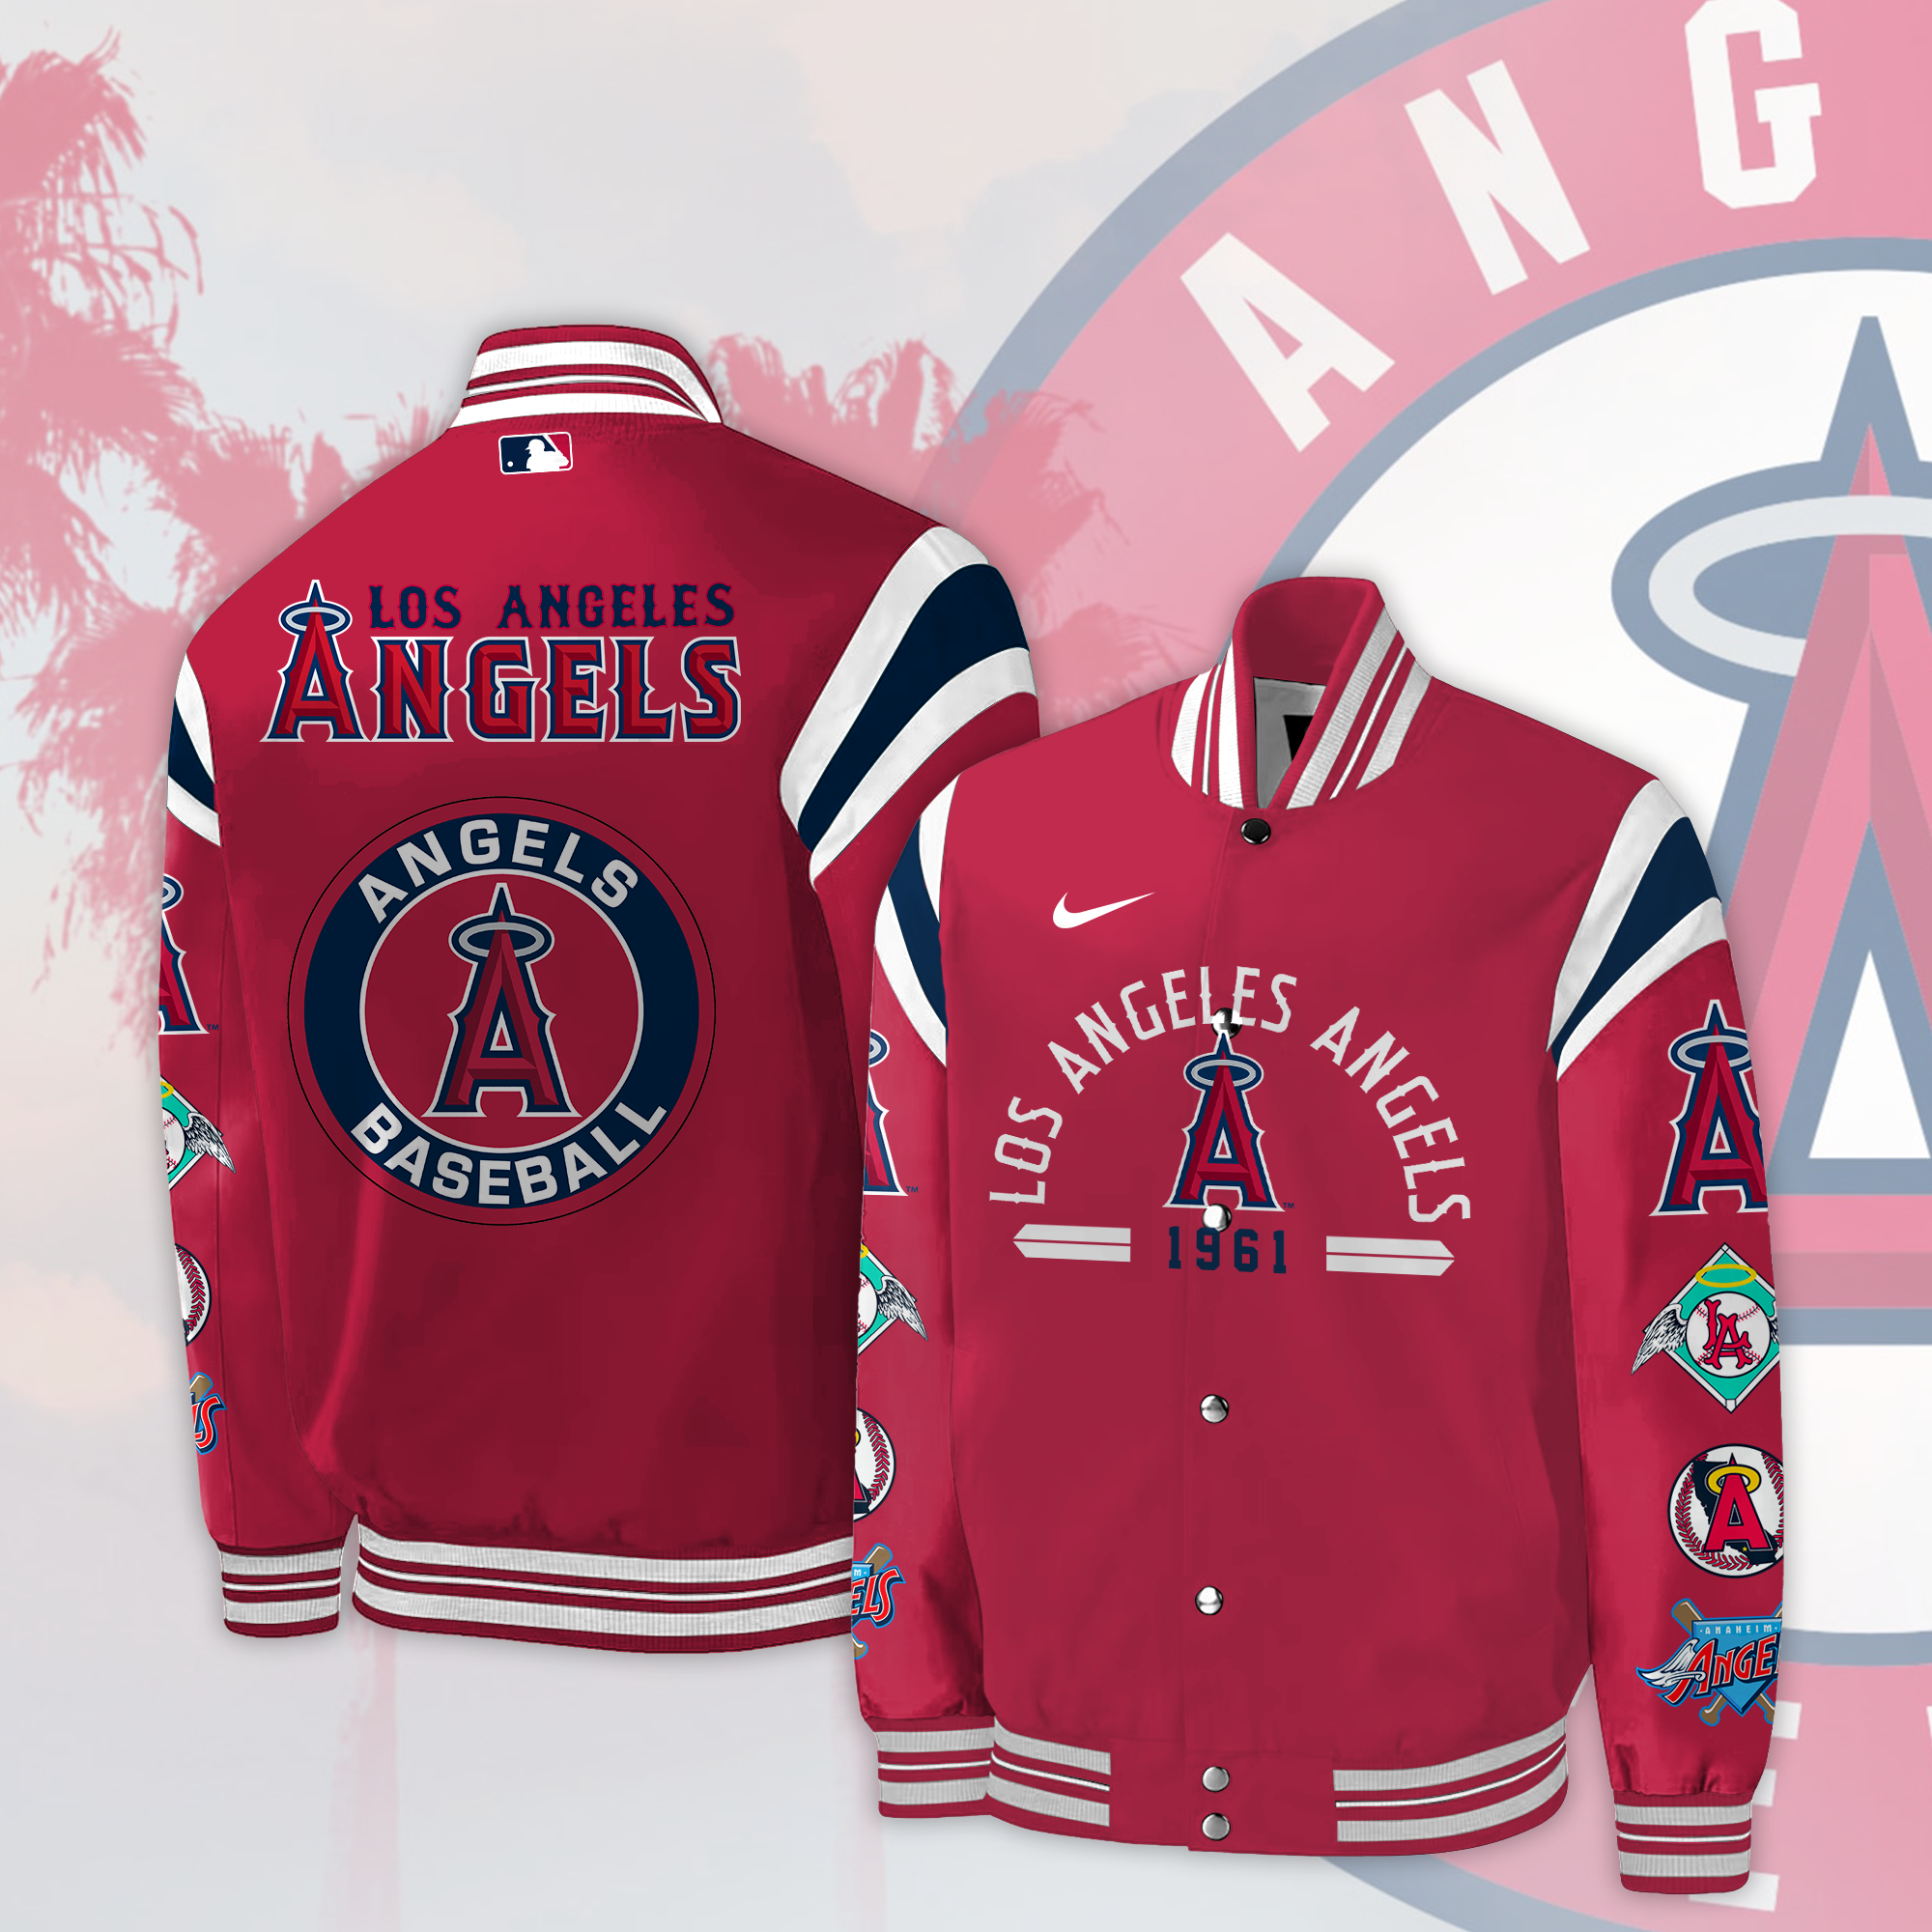 Palm Angels University Jacket In Multicolor | ModeSens